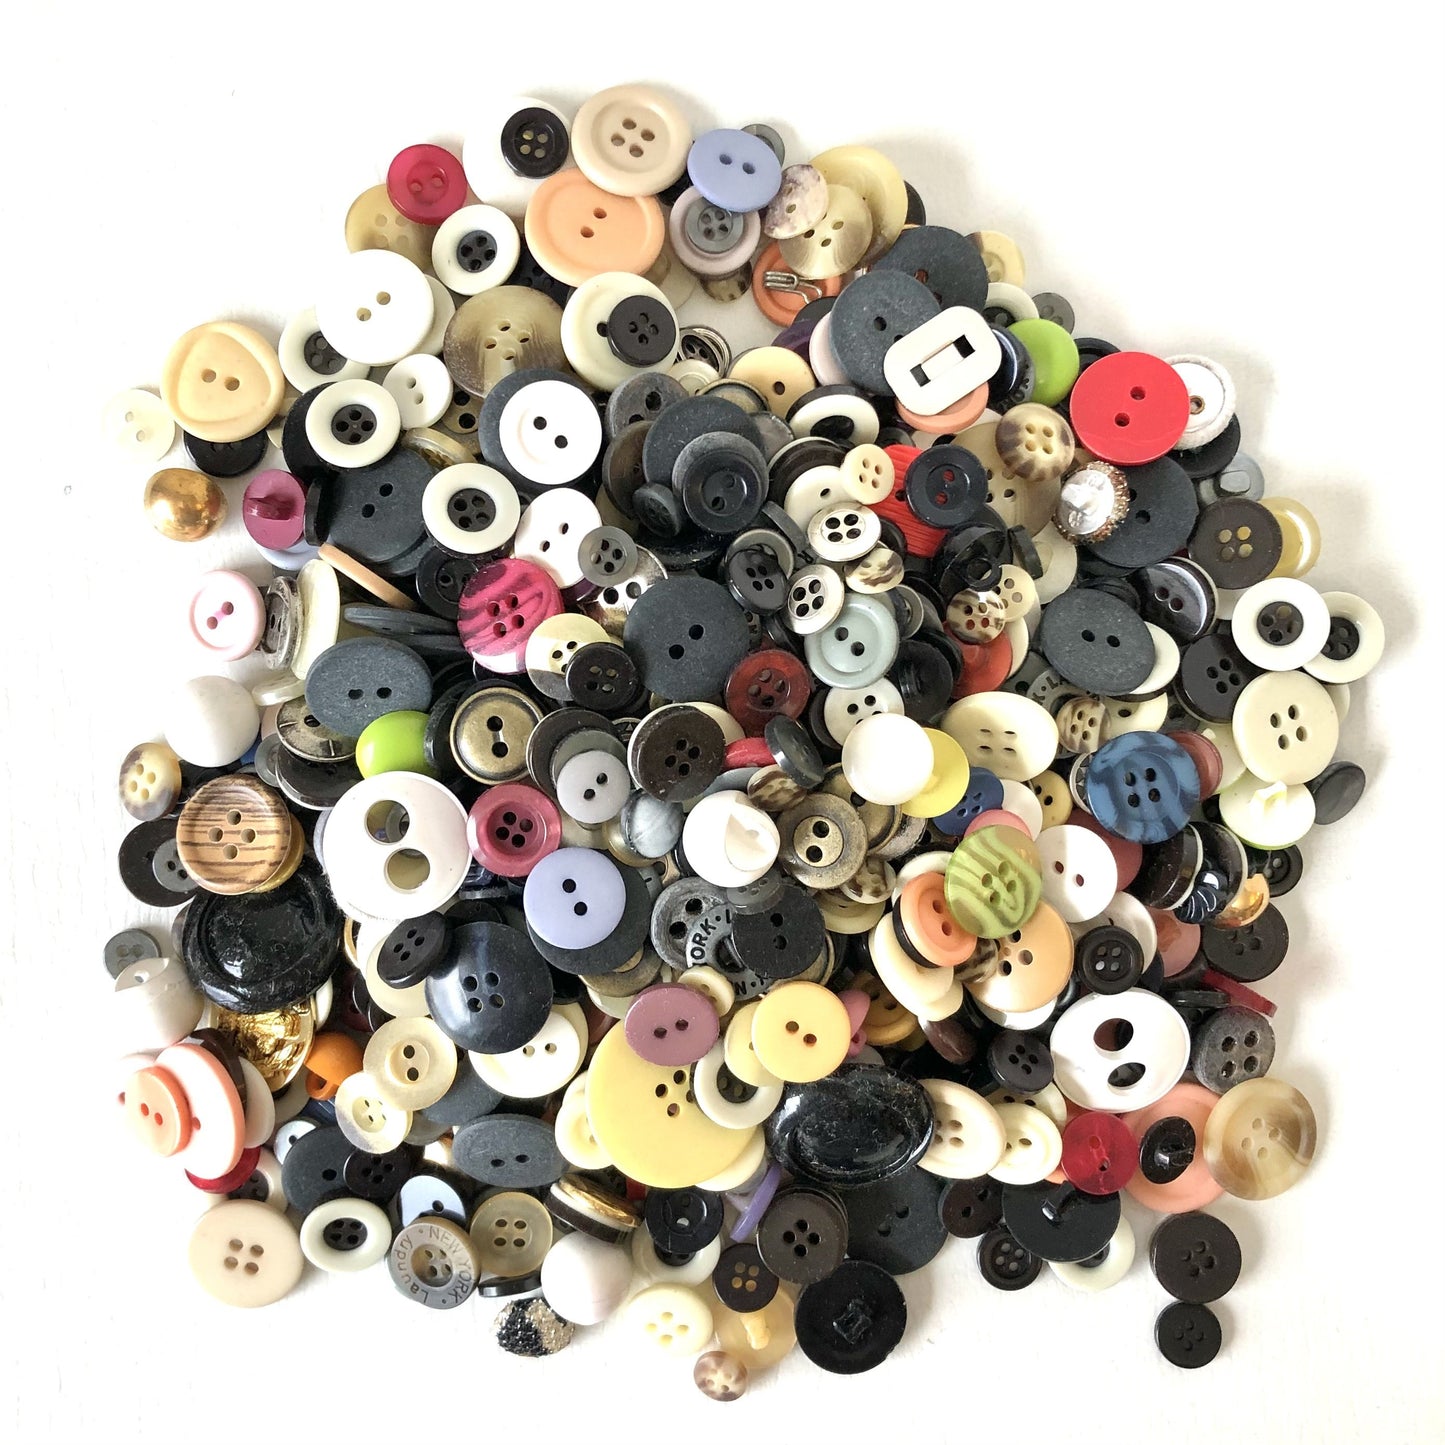 One pound Bag of Assorted Buttons